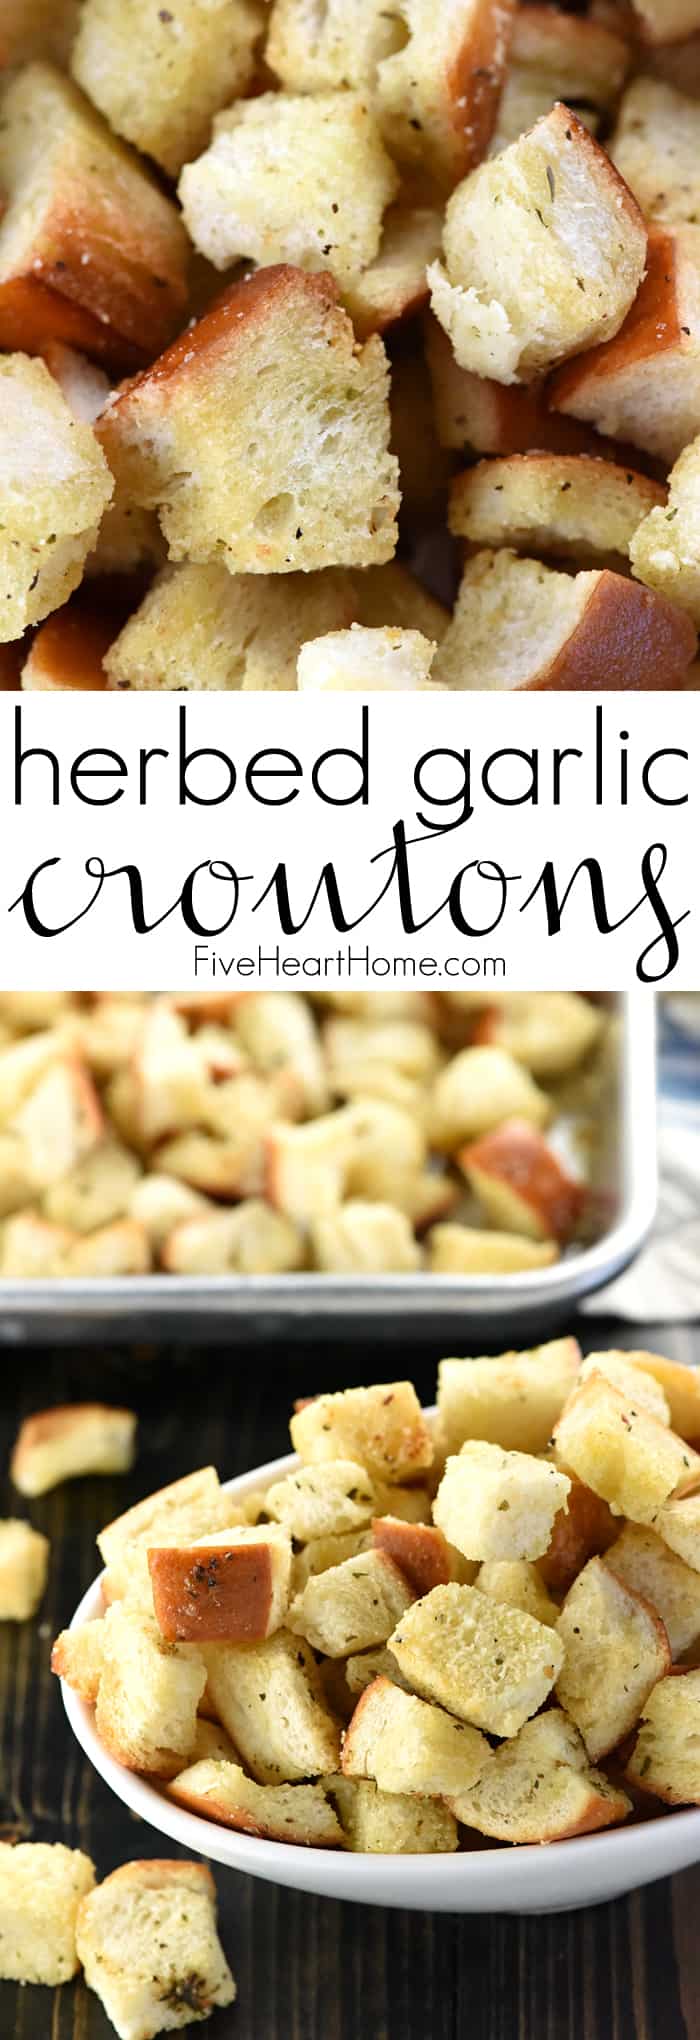 Homemade Croutons ~ with garlic and herbs, these crunchy croutons are easy to make and a flavorful way to jazz up your favorite salad and soup recipes, from Caesar Salad to Tomato Soup...add Parmesan to make them even more special! | FiveHeartHome.com via @fivehearthome